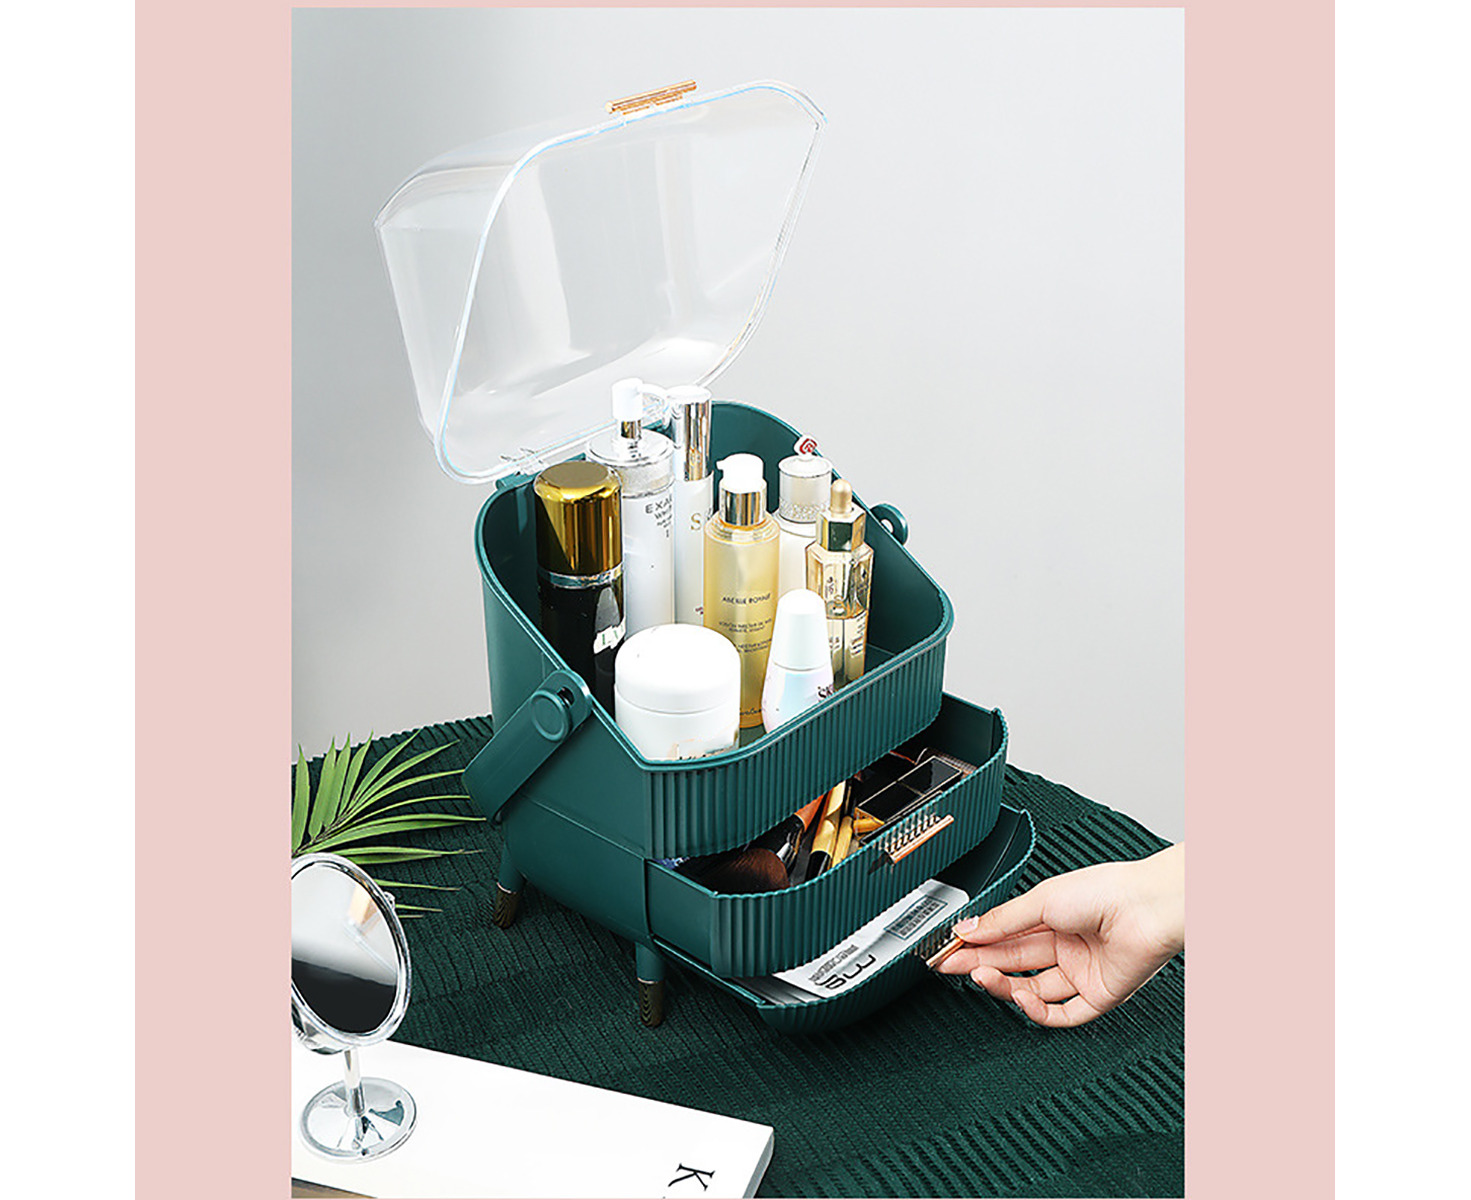 Cosmetic Caddy With Handle